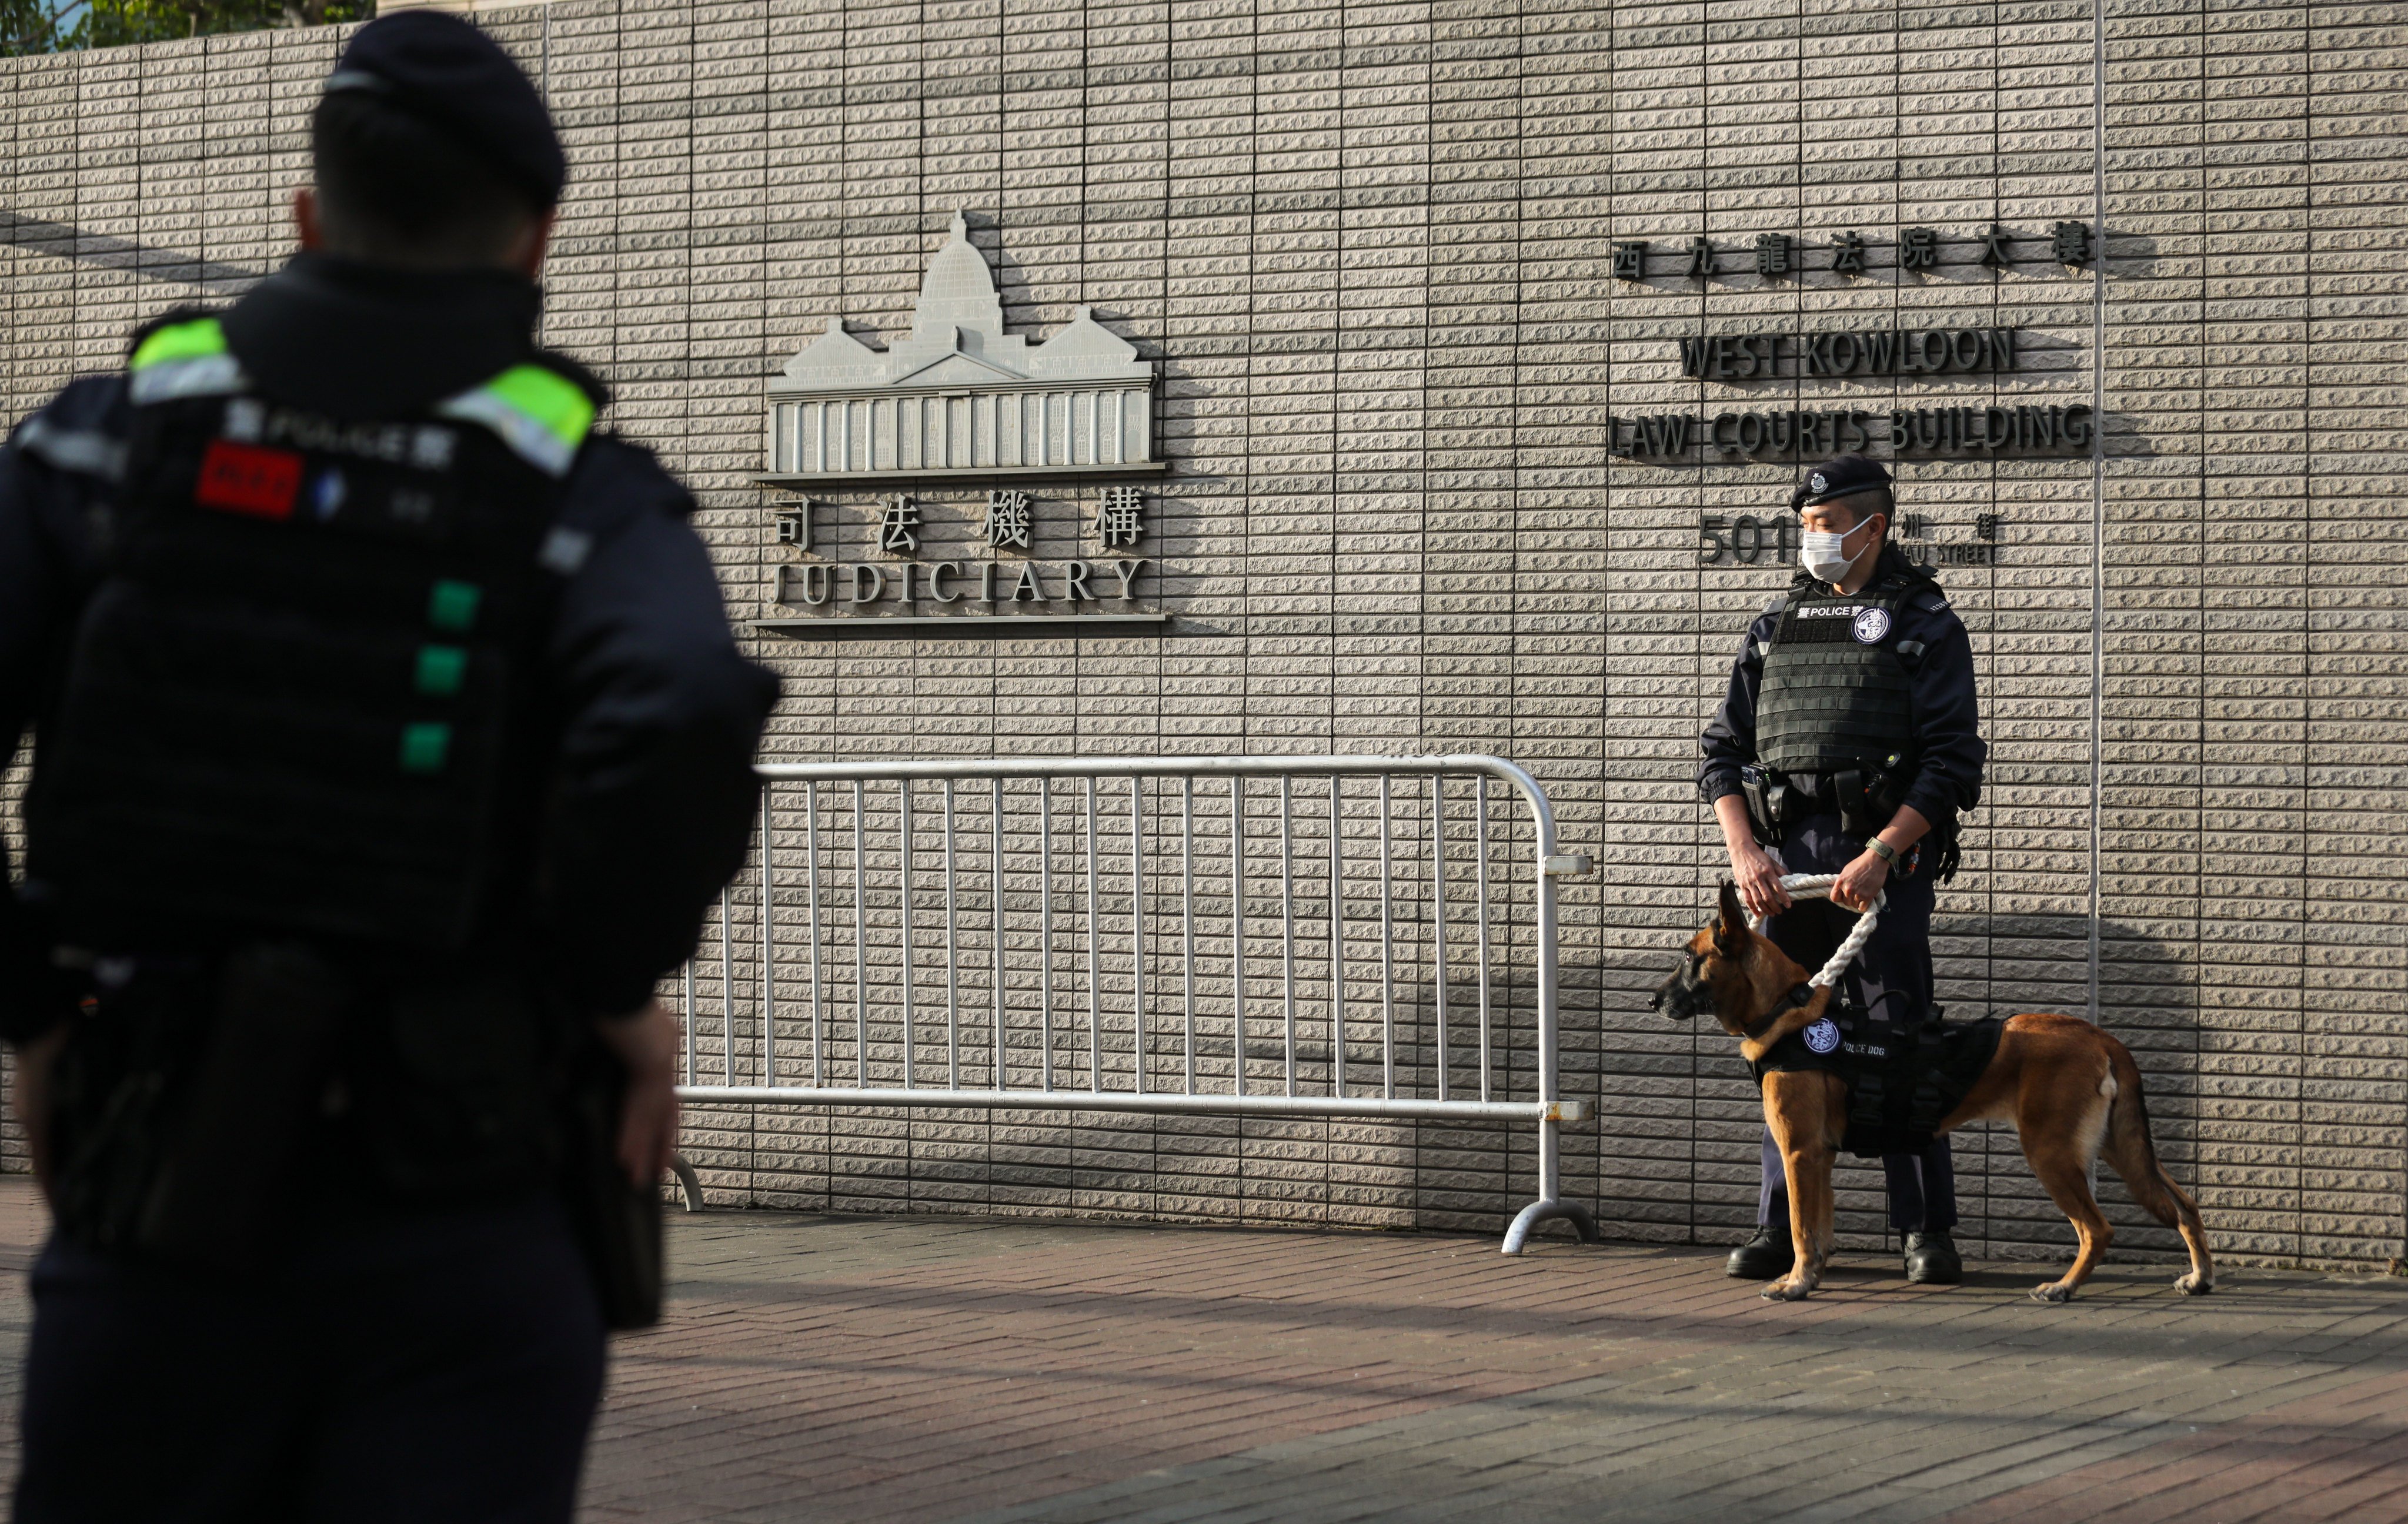 Jimmy Lai’s trial is being heard at West Kowloon Court. Photo: Xiaomei Chen